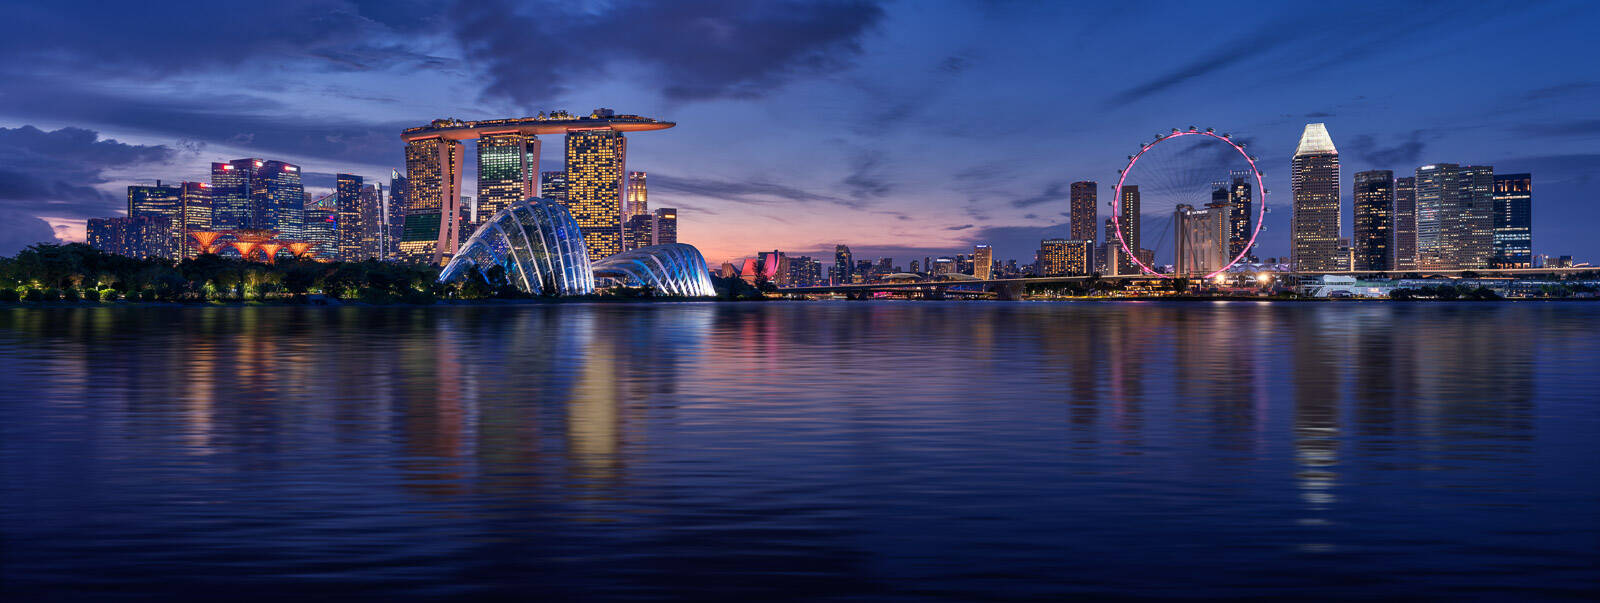 Image of Gardens by the Bay (East) by Juraj Zimányi